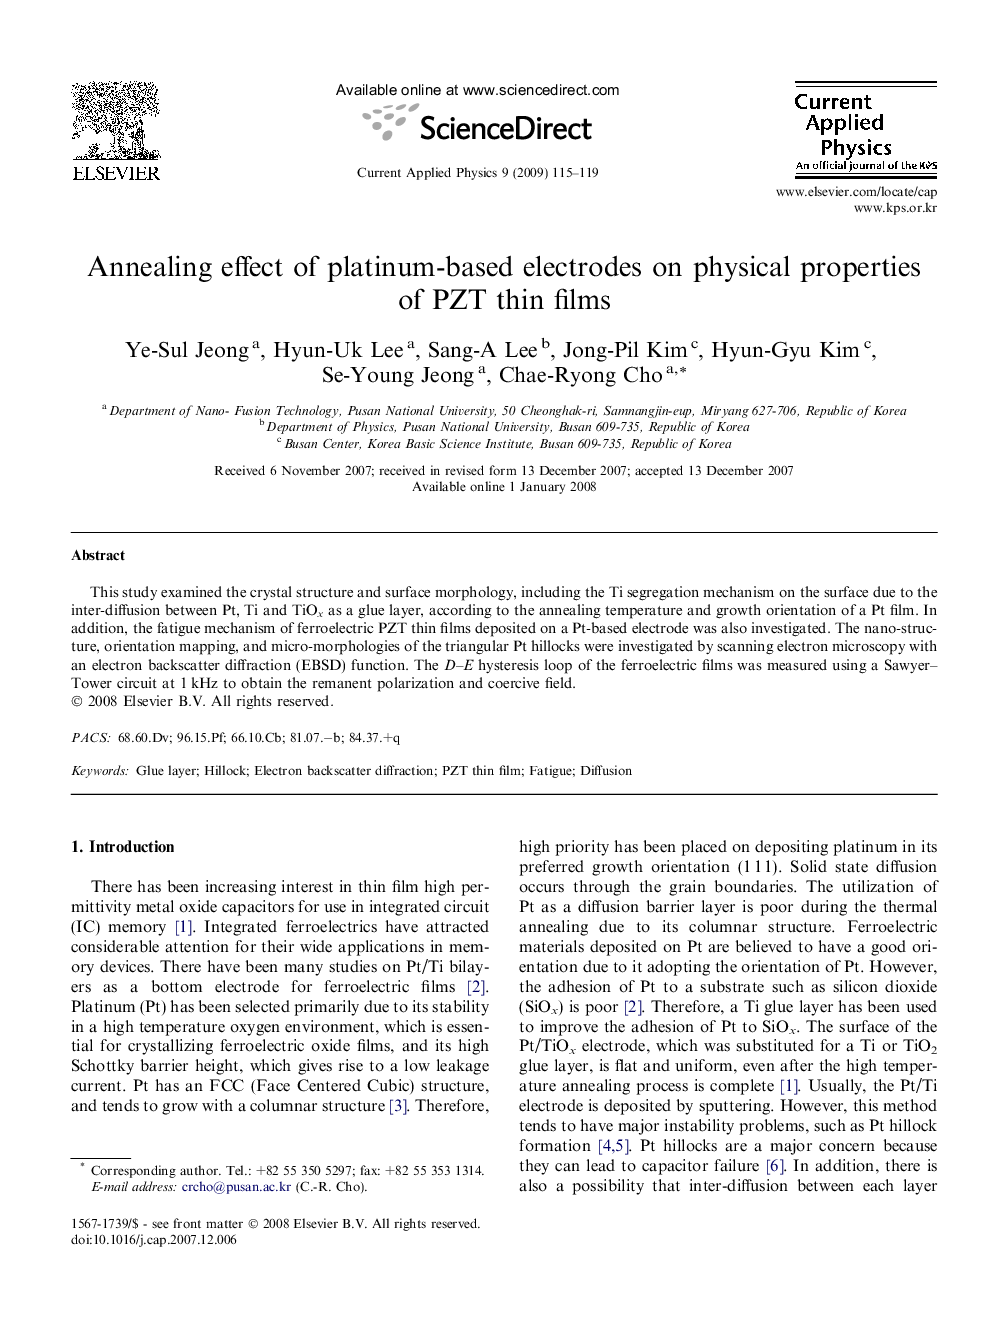 Annealing effect of platinum-based electrodes on physical properties of PZT thin films